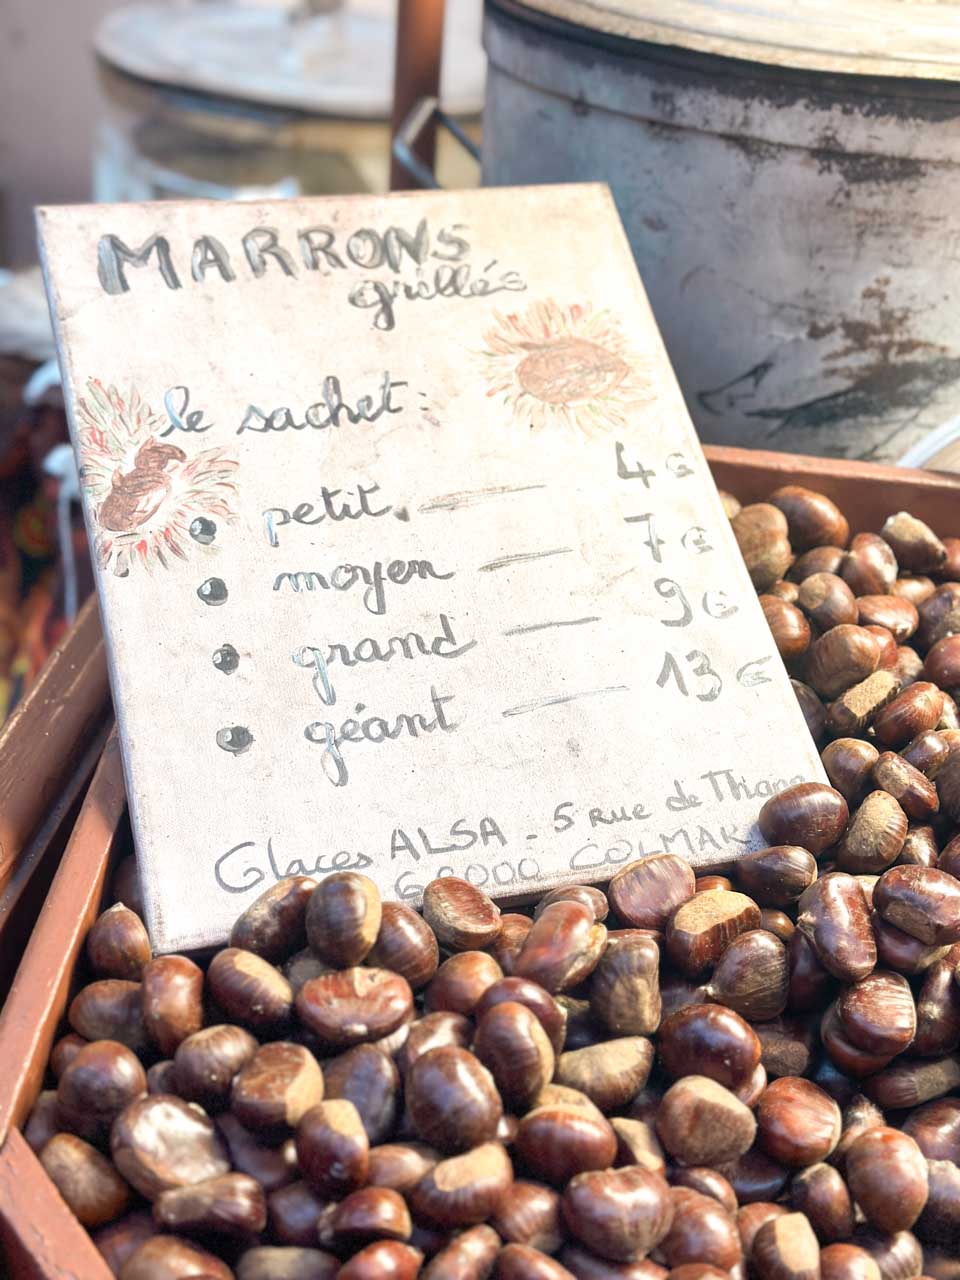 A close-up of roasted chestnuts displayed in a wooden crate, with a hand-painted sign listing prices for different sizes at the Colmar Christmas Markets